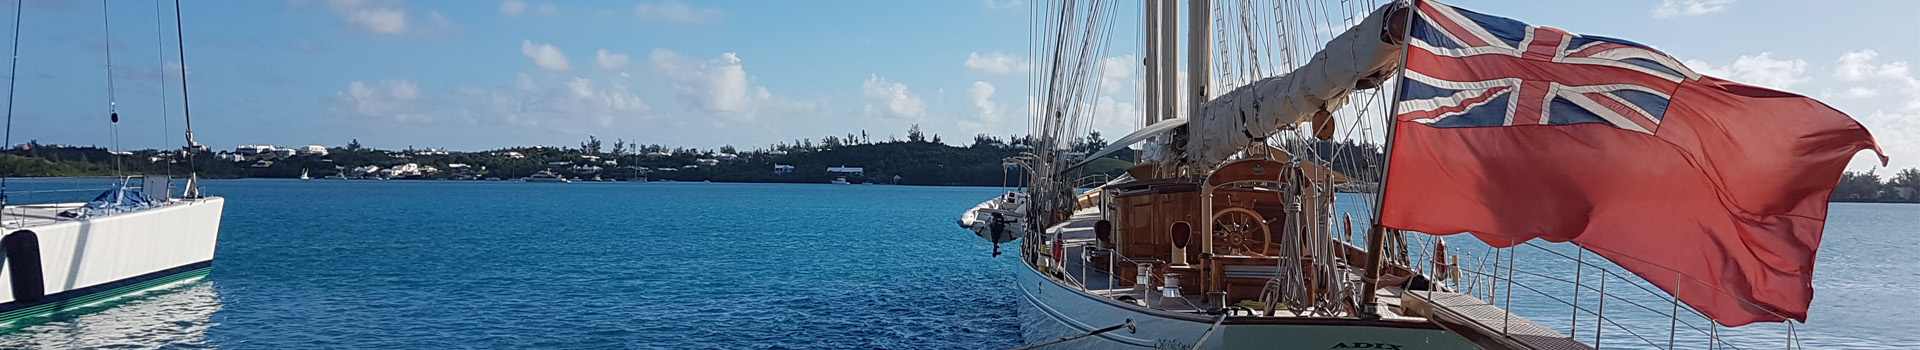 About Bermuda Yacht Services